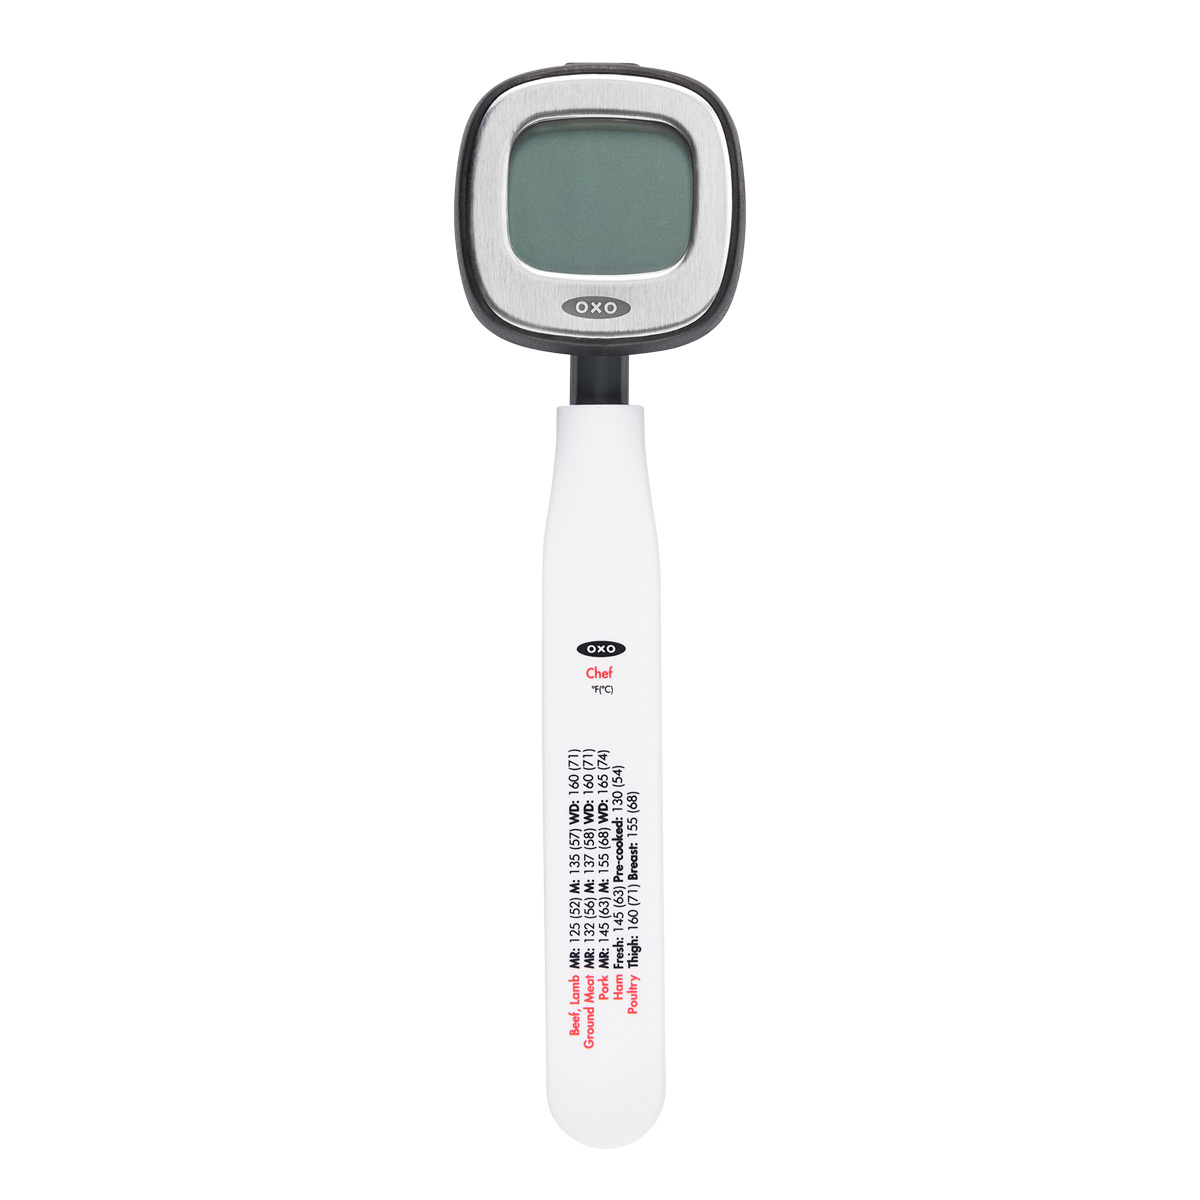 OXO Good Grips Candy and Deep Fry Cooking Thermometer - Loft410